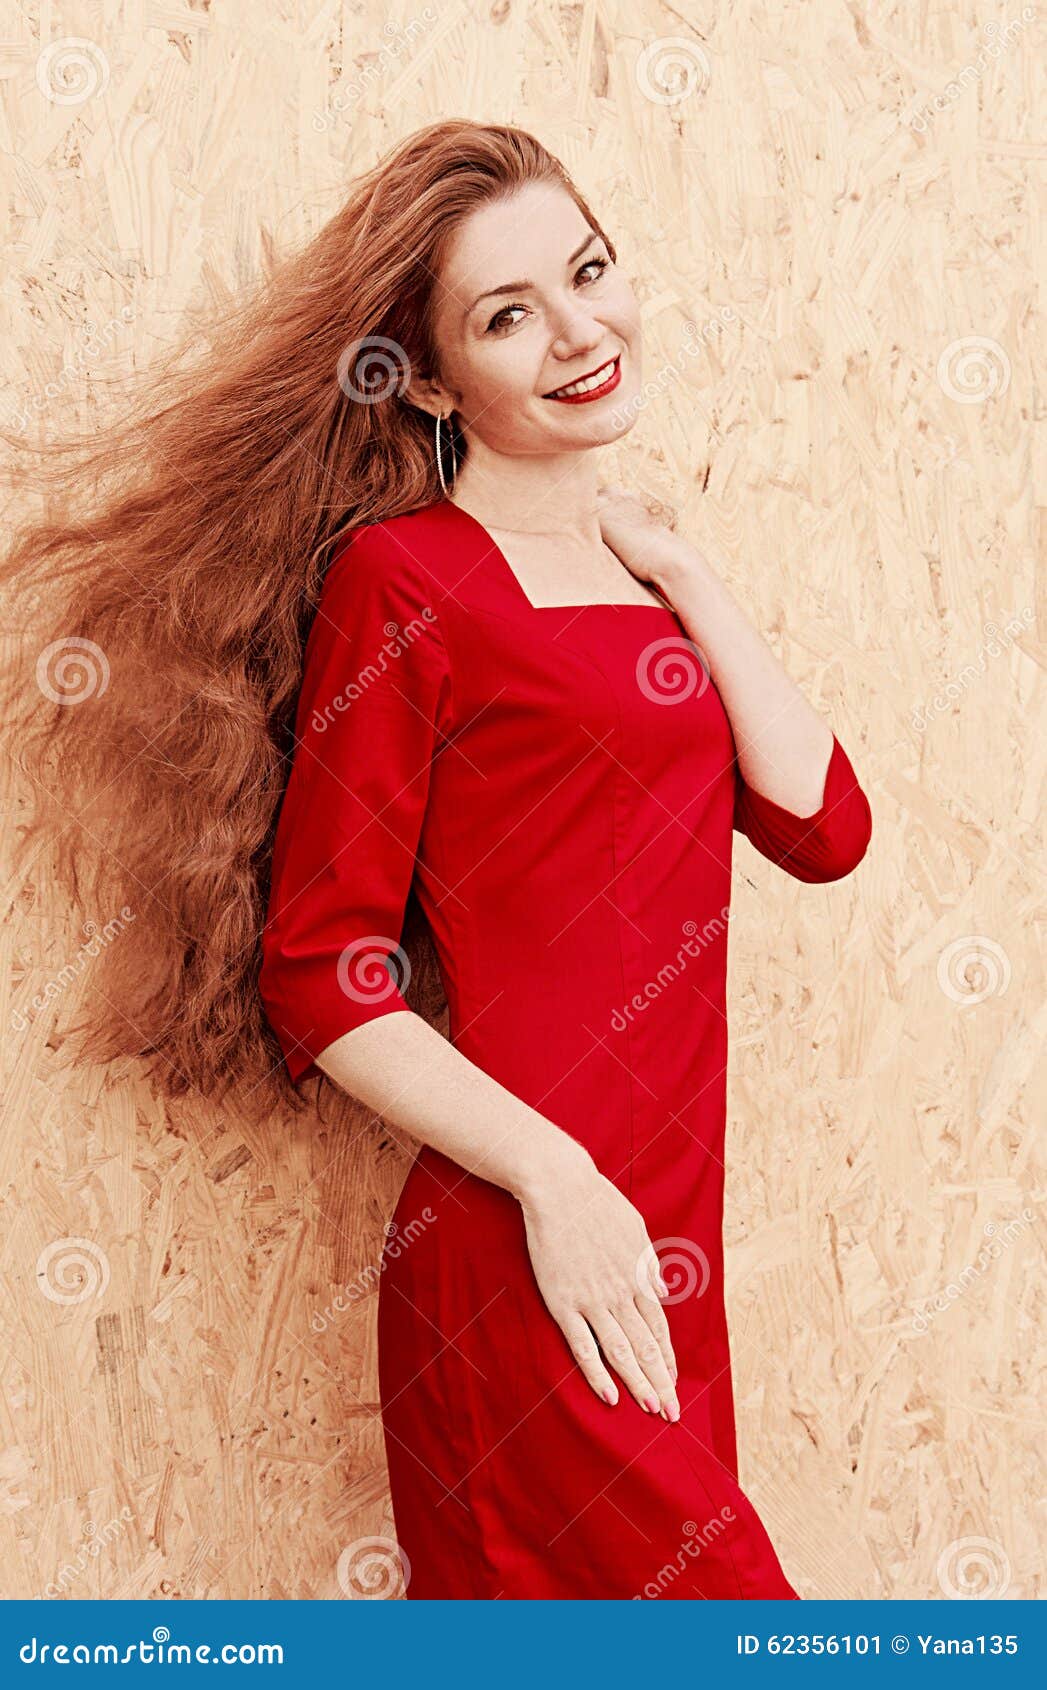 Beautiful Girl with Long Hair Stock Image - Image of